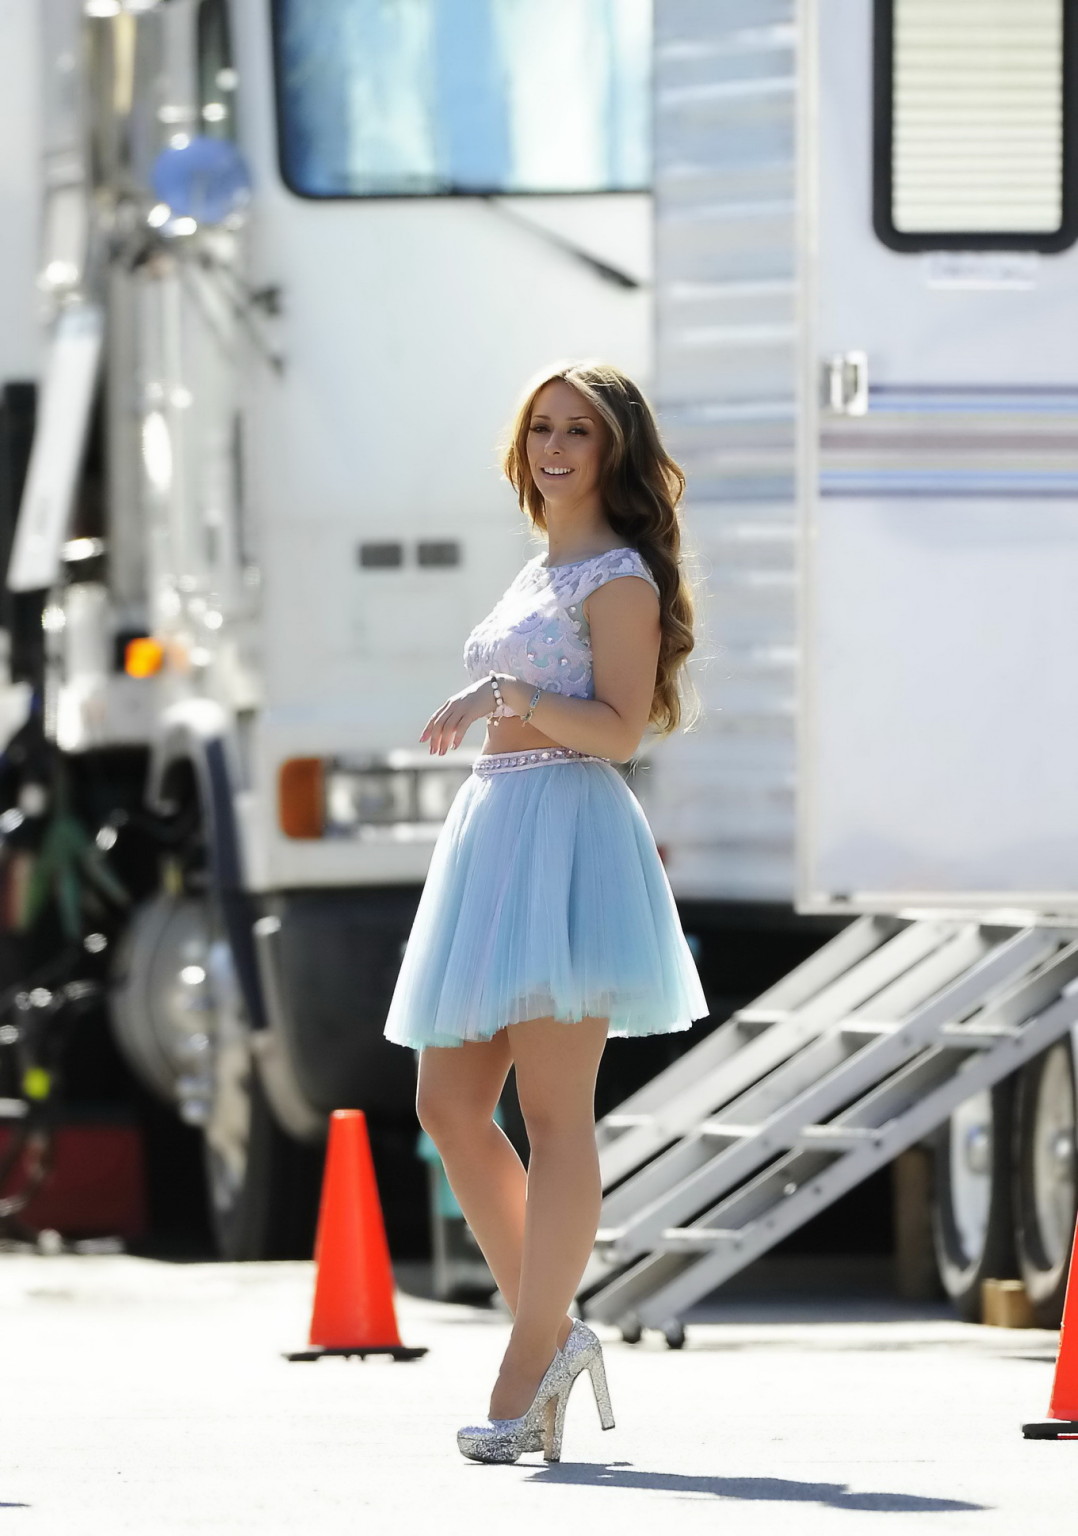 Jennifer Love Hewitt busty  leggy in see-through top and mini skirt while filmin #75244529